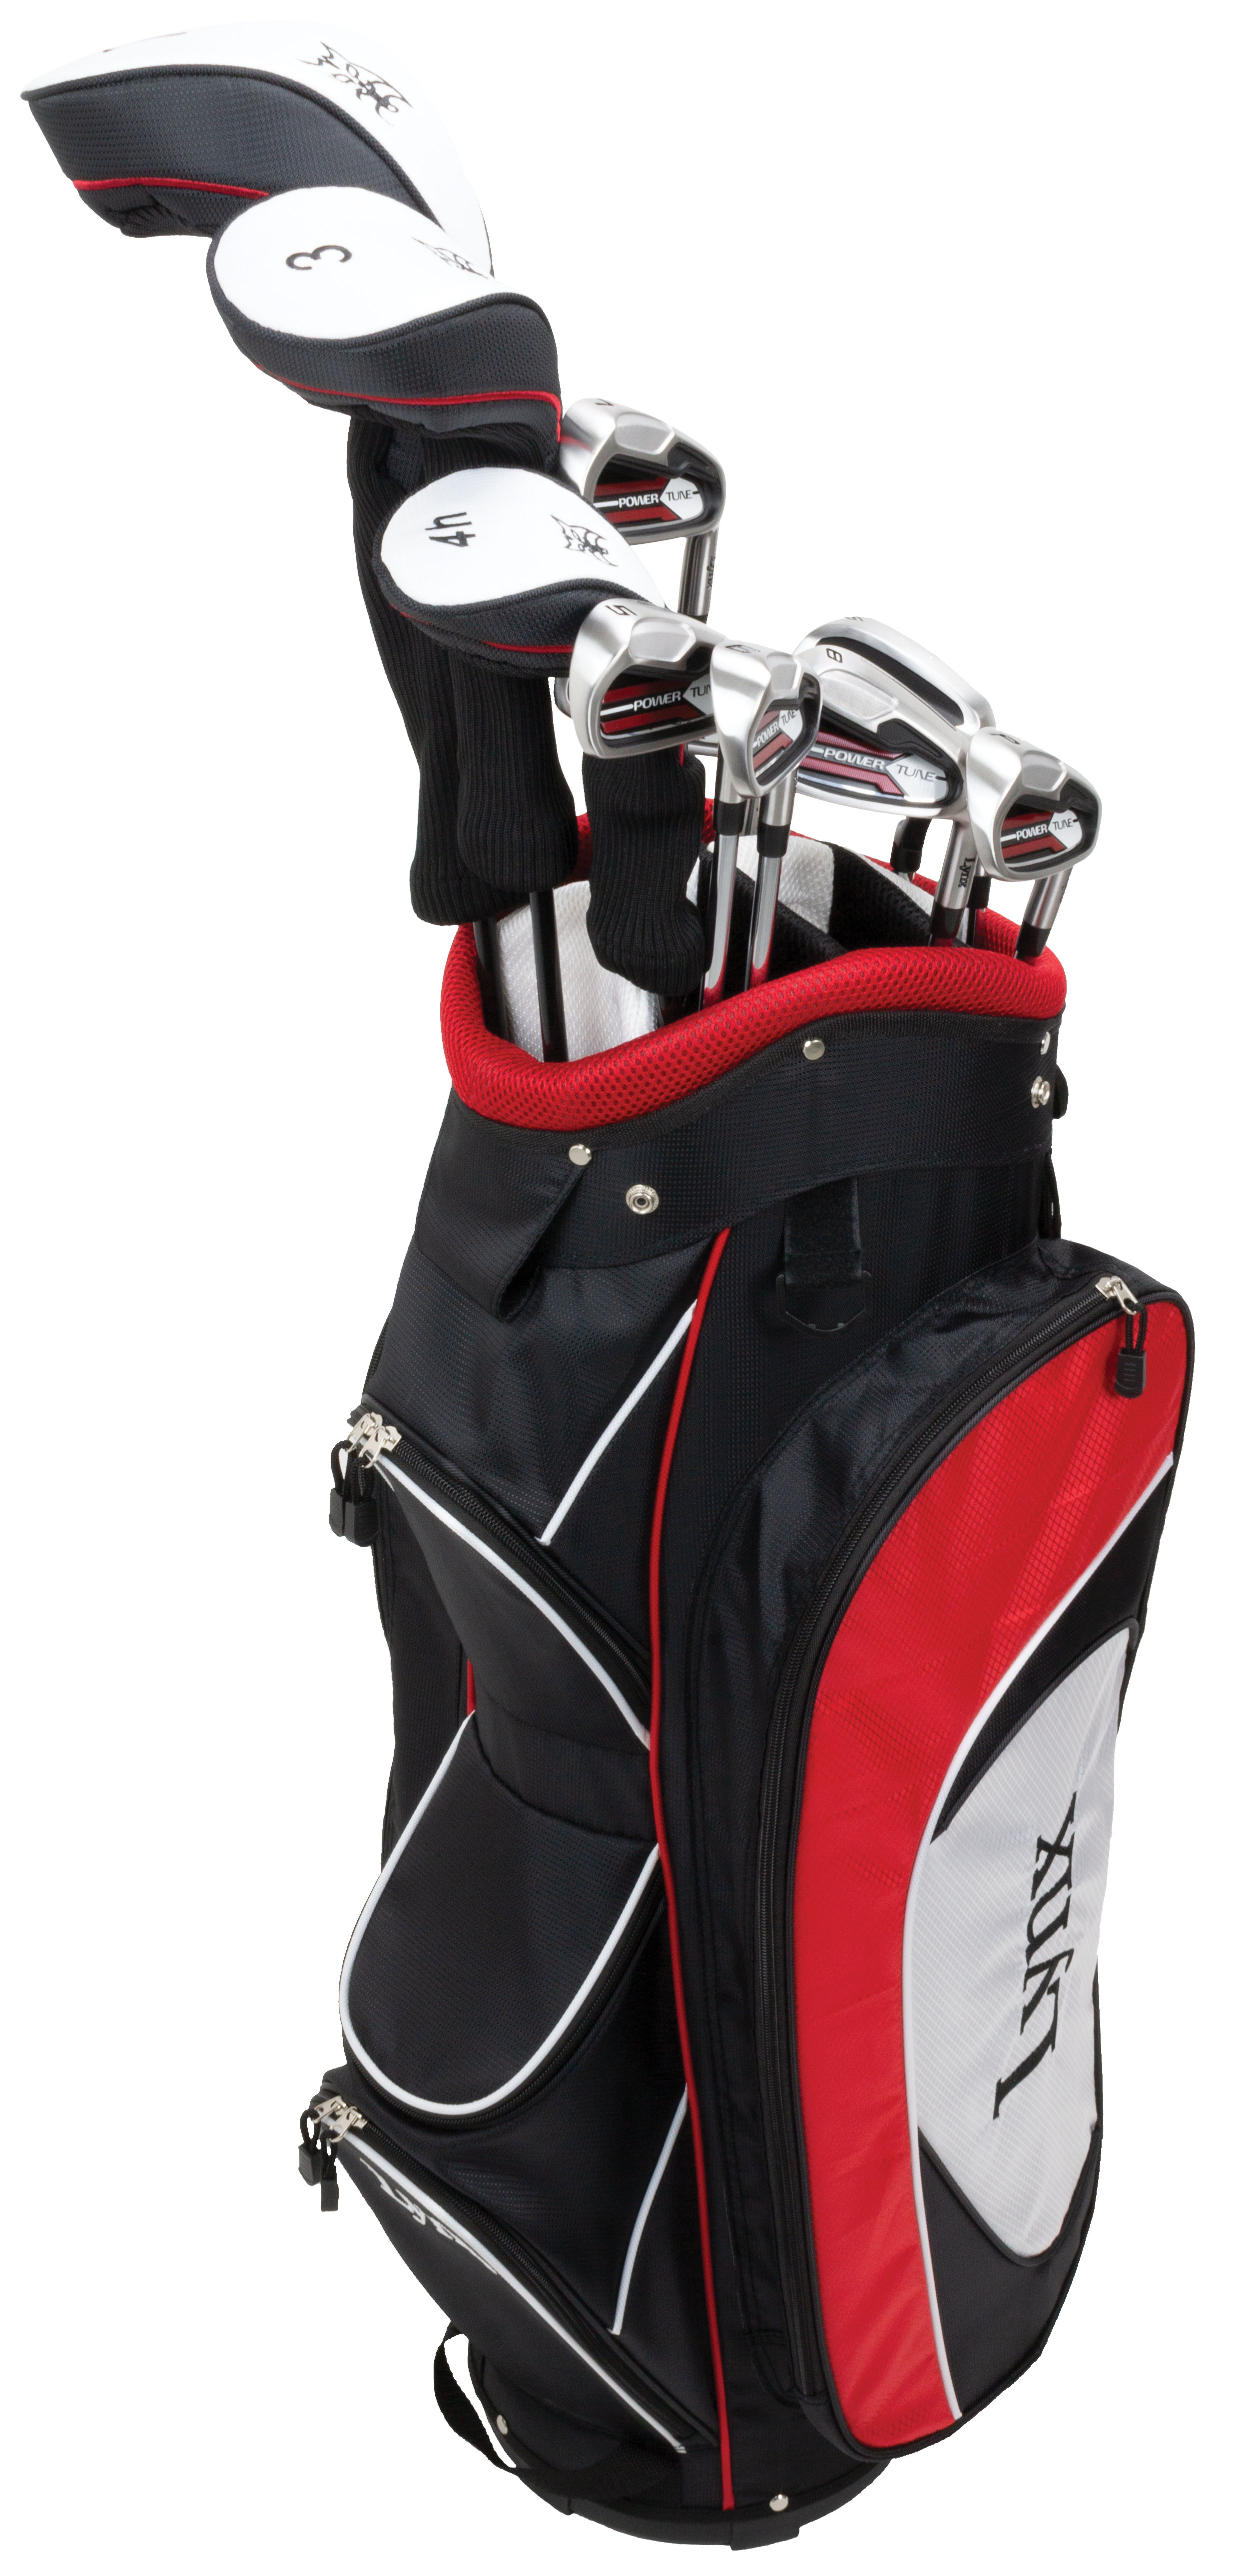 Lynx Power Tune Men's Complete 11-Piece Golf Club Set with Cart Bag, Right Handed - image 1 of 10